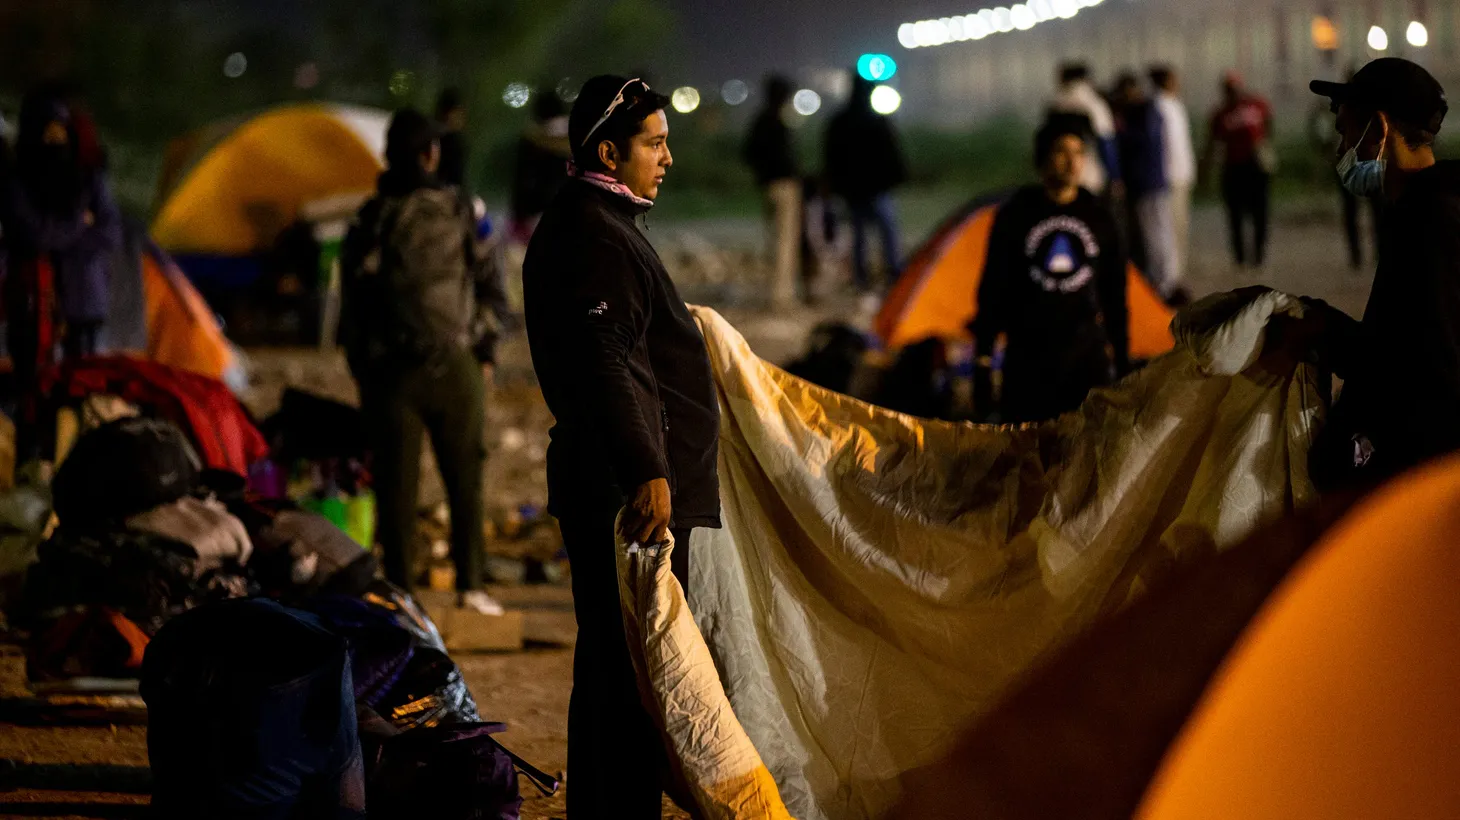 Venezuelan migrants set up an encampment on the south bank of the Rio Grande in Ciudad Juarez. Many of the migrants have been expelled under Title 42 after seeking asylum and are hoping to be accepted as refugees in the U.S., November 28, 2022.